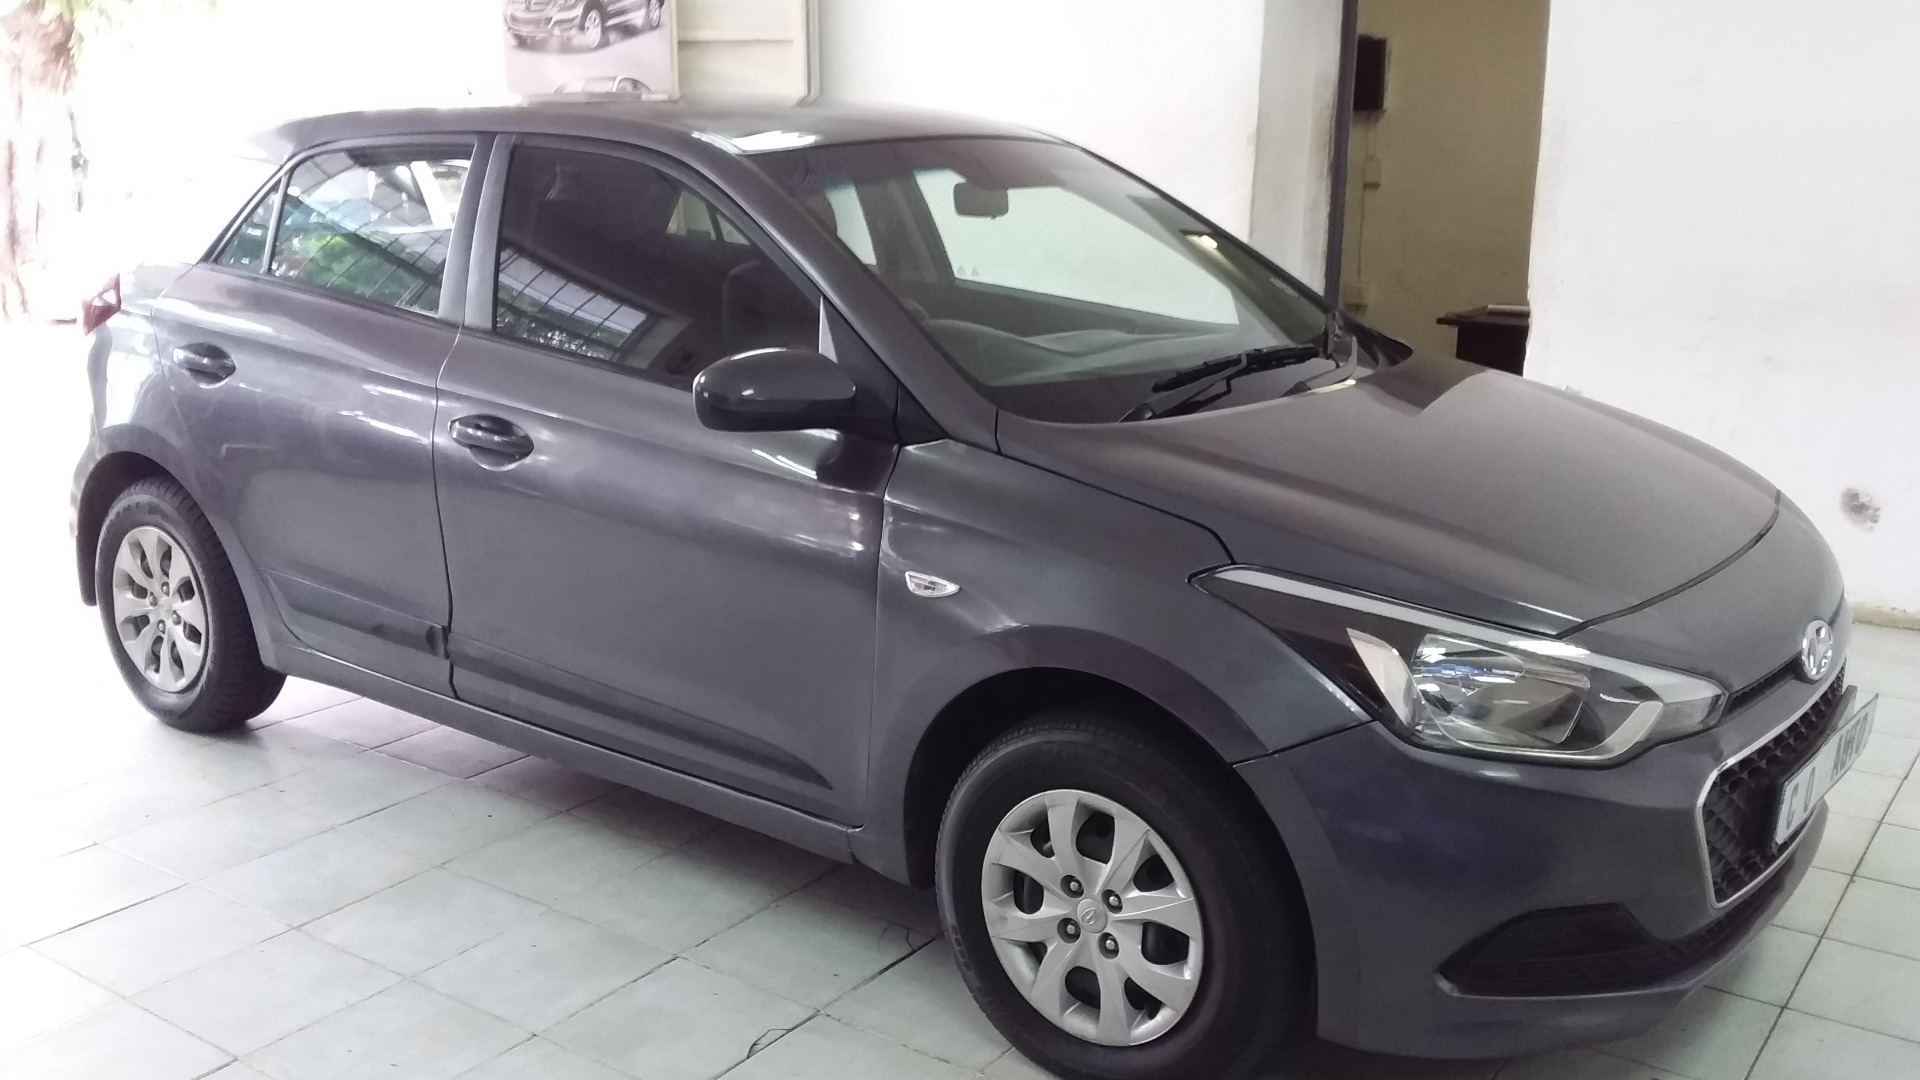 Hyundai I20 1.2 Motion for sale in Gauteng Auto Mart